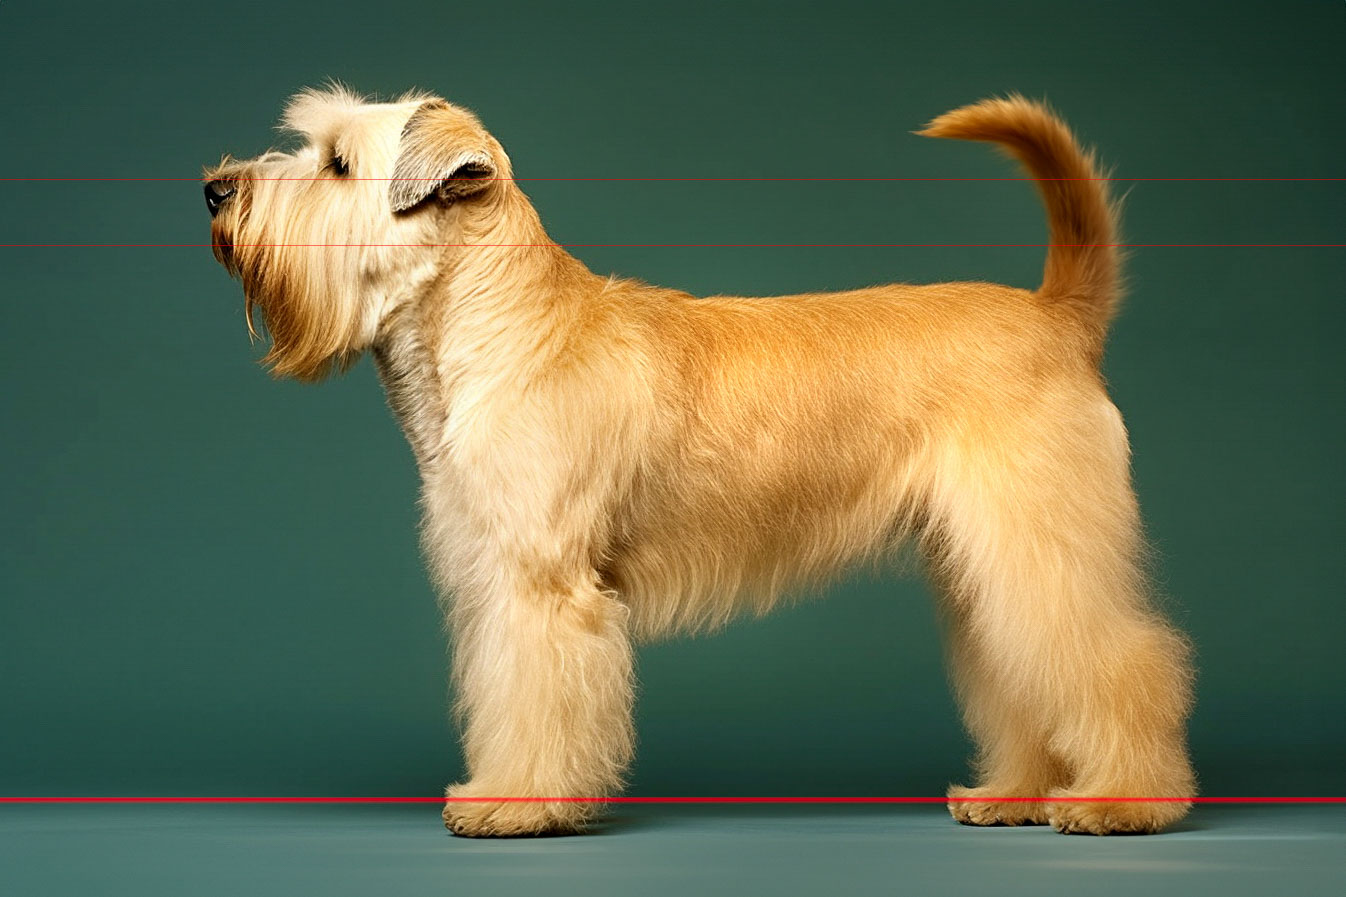 In this picture, a Wheaten Terrier stands in a side profile against a solid teal background. The dog's fluffy, wheaten coat is light golden with a bushy beard and ears that fold forward. Its triangular tail curves upwards, and its fur is perfectly groomed.